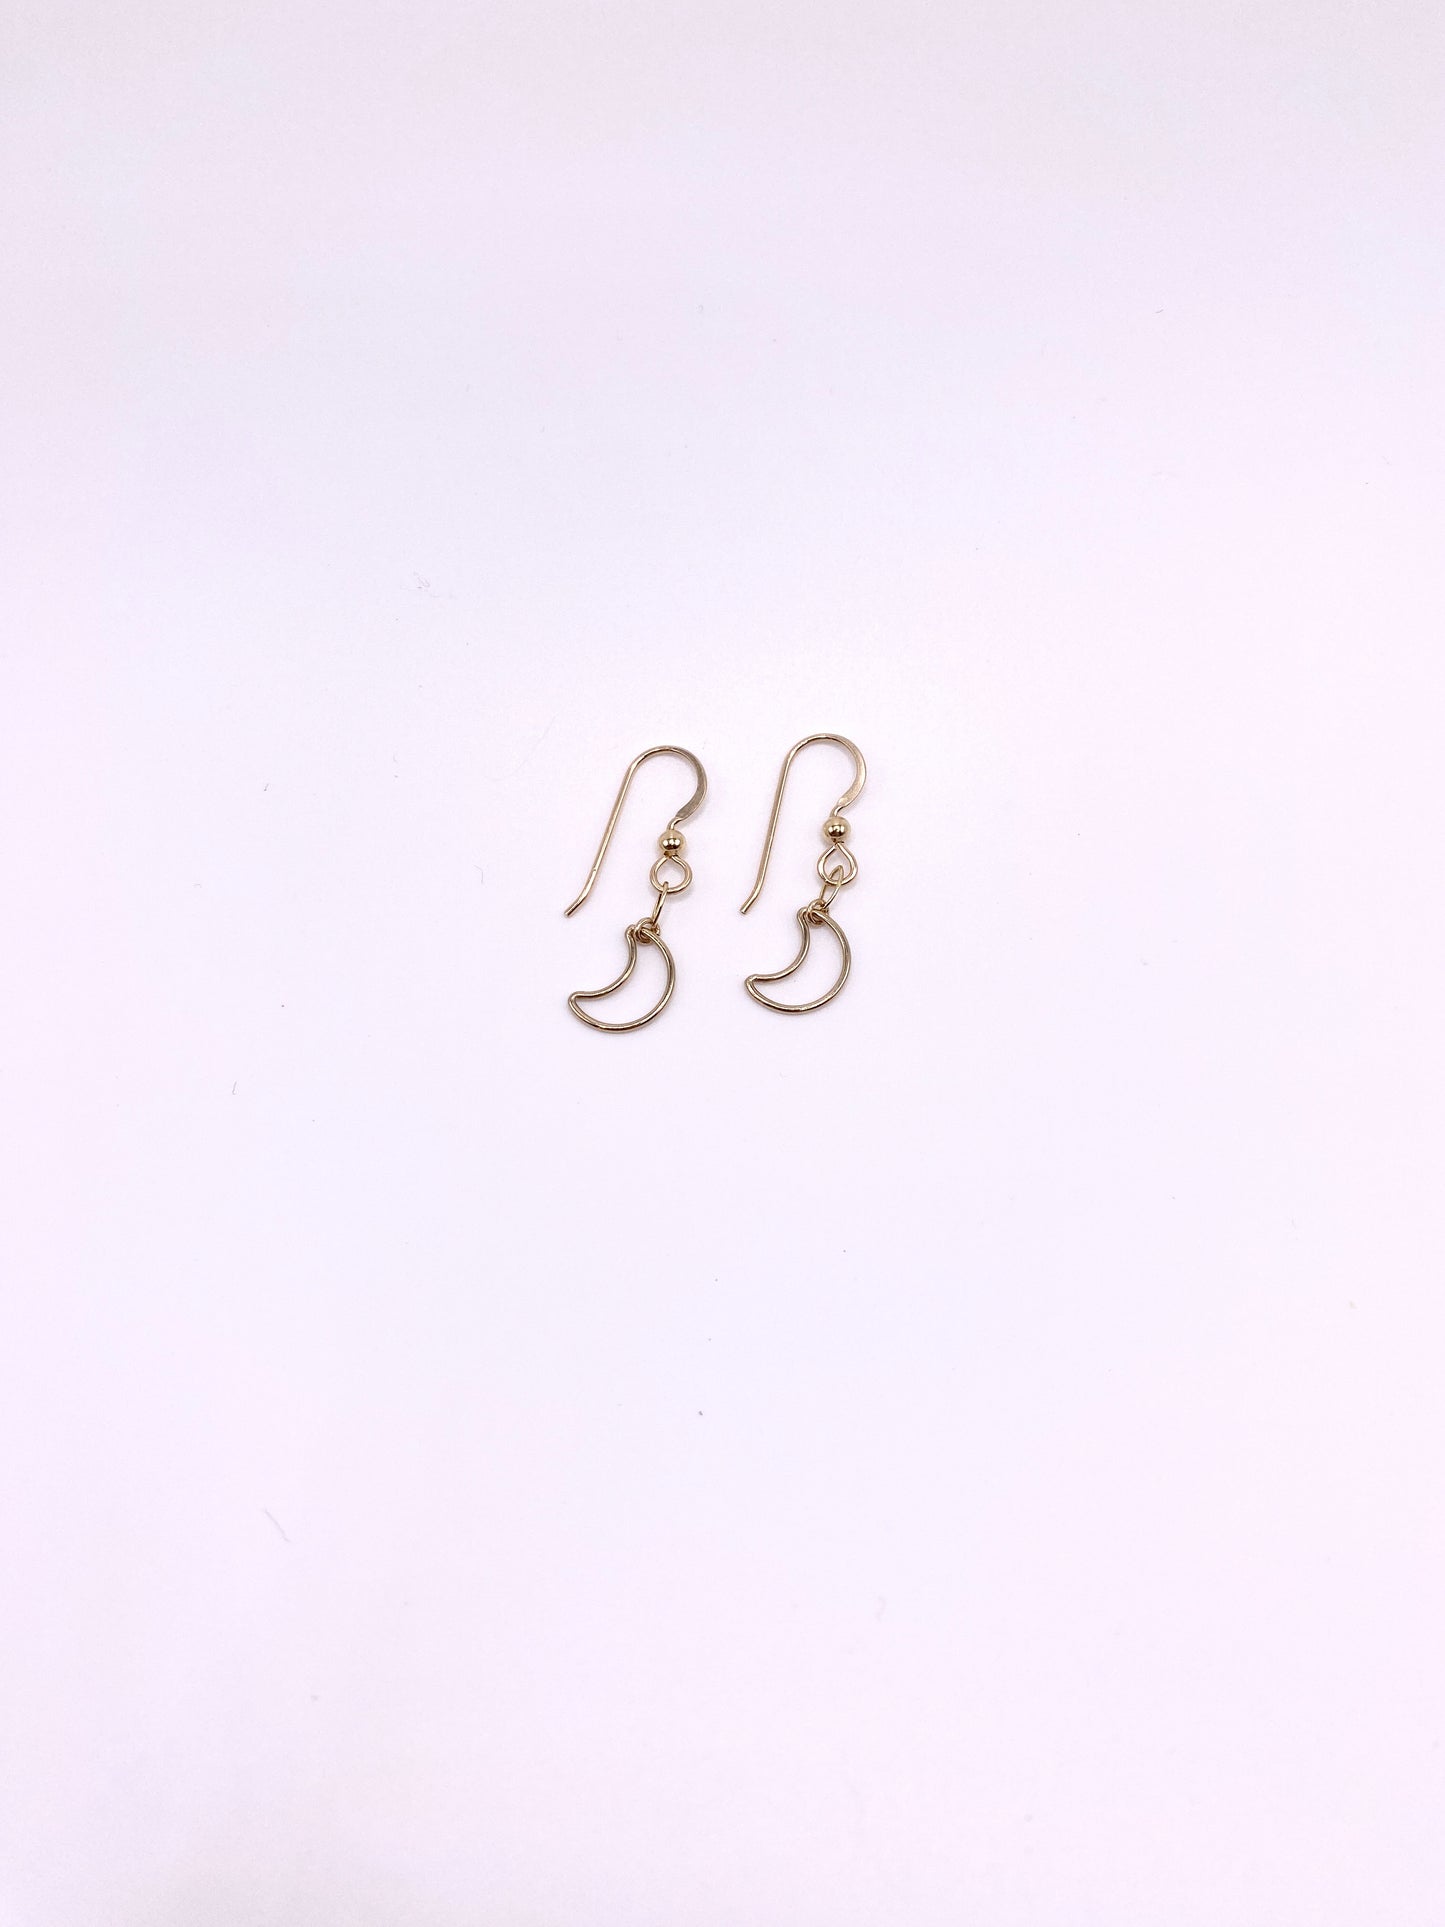 Crescent Moons ~ 14K Yellow Gold Fill Earrings